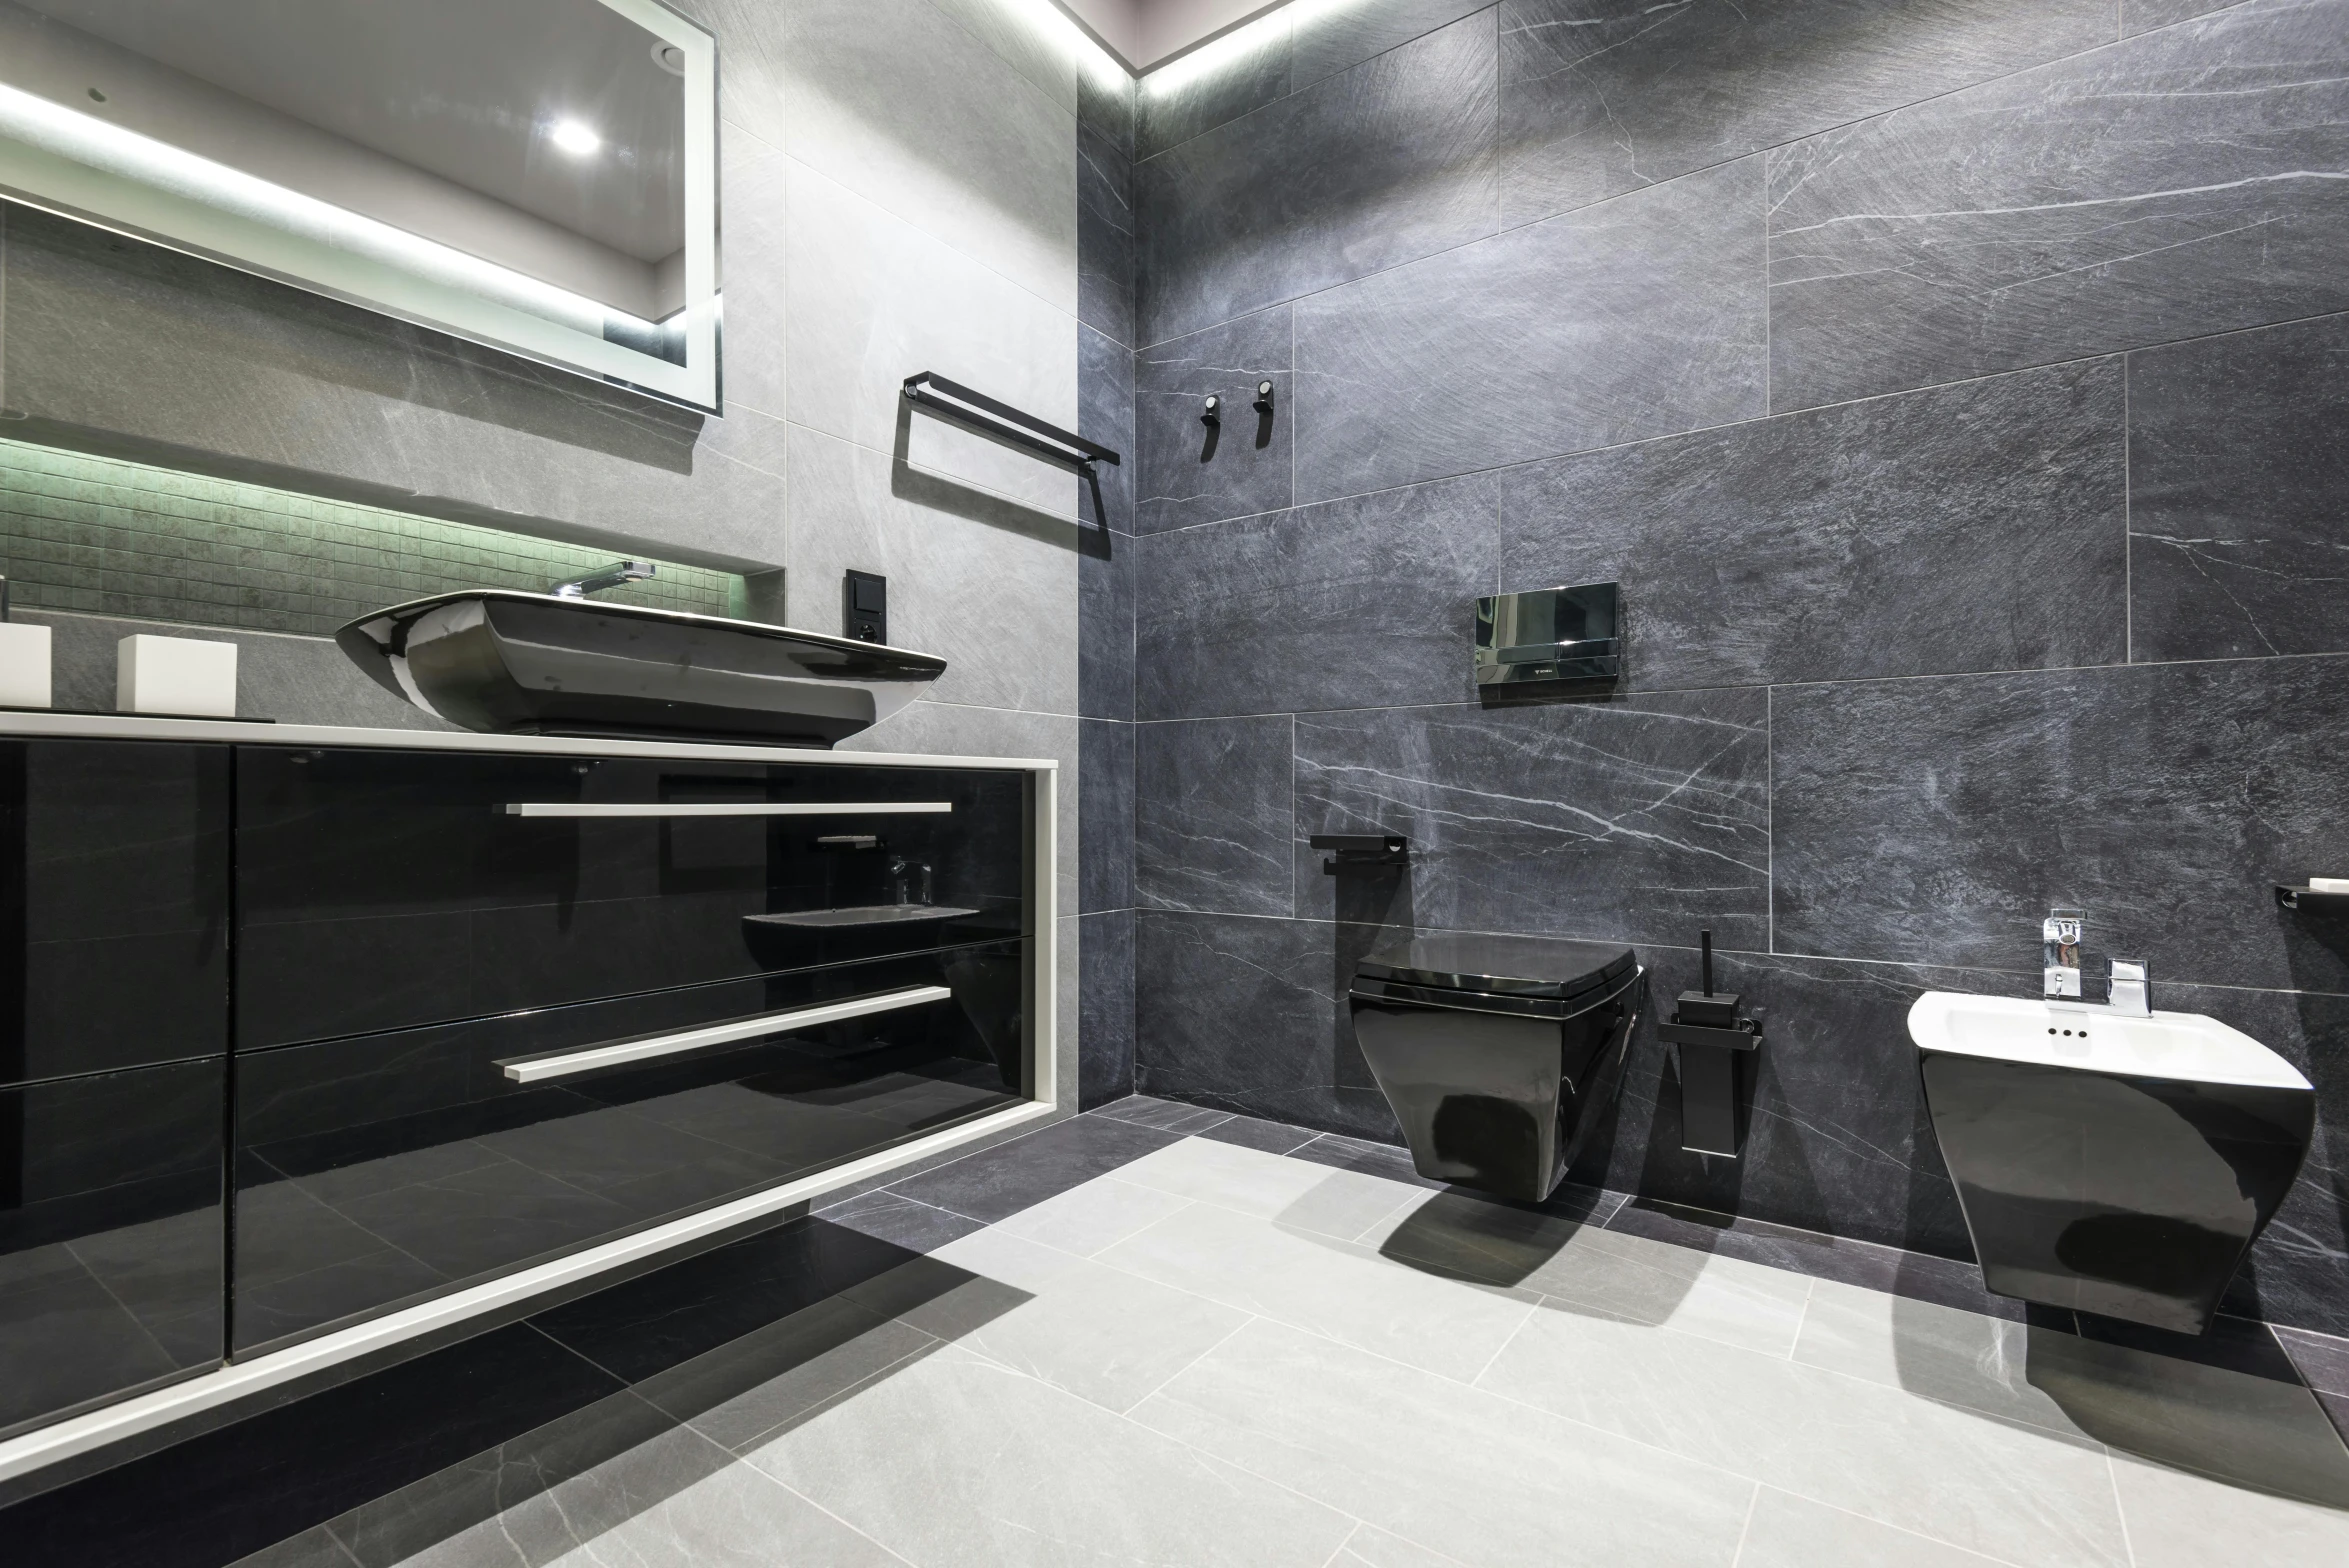 the modern bathroom has a white sink and two black toilets